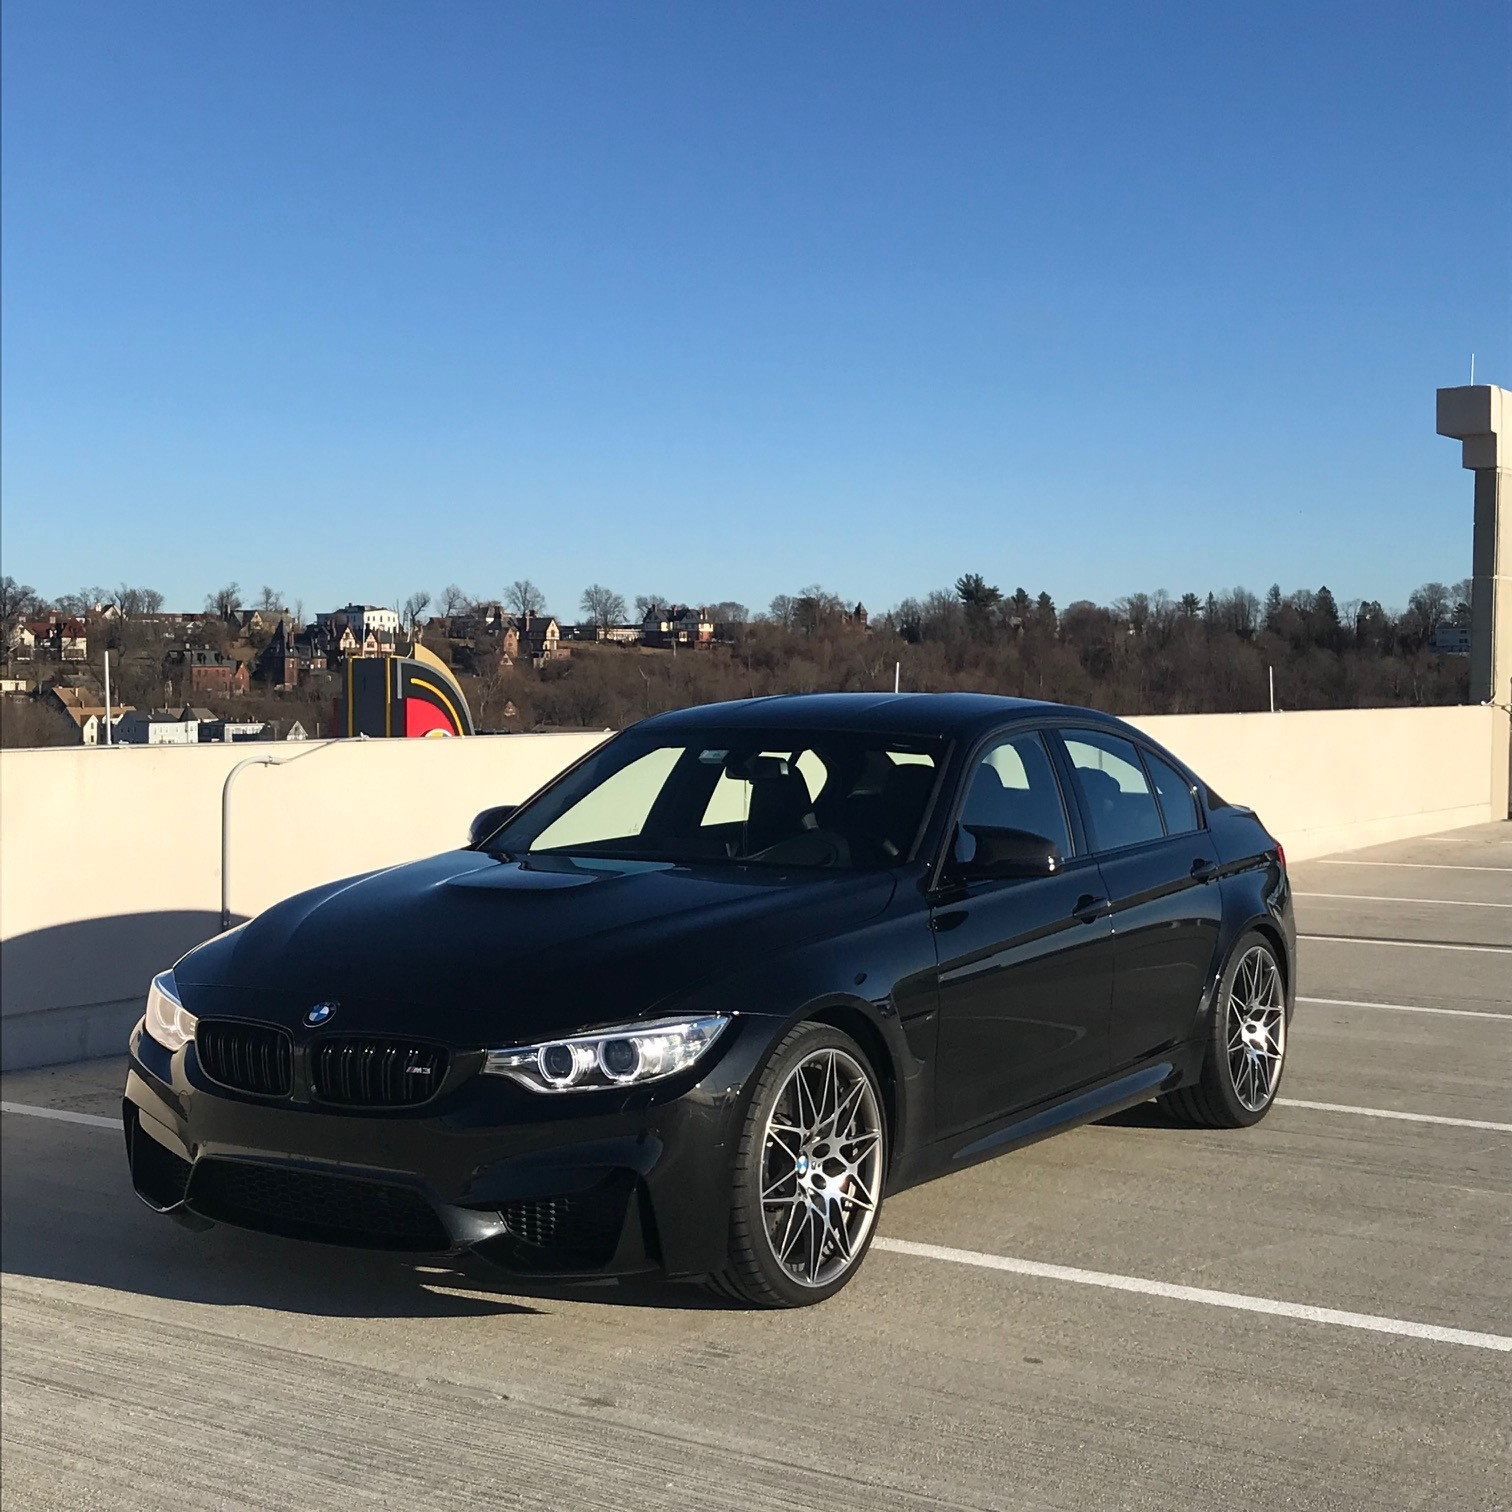 2017 BMW M3 - 2017 BMW M3 Competition Package, 6 speed manual, under 6,000 miles priced to sell. - Used - VIN WBS8M9C57H5G42244 - 5,785 Miles - 6 cyl - 2WD - Manual - Sedan - Black - Ludlow, MA 01056, United States